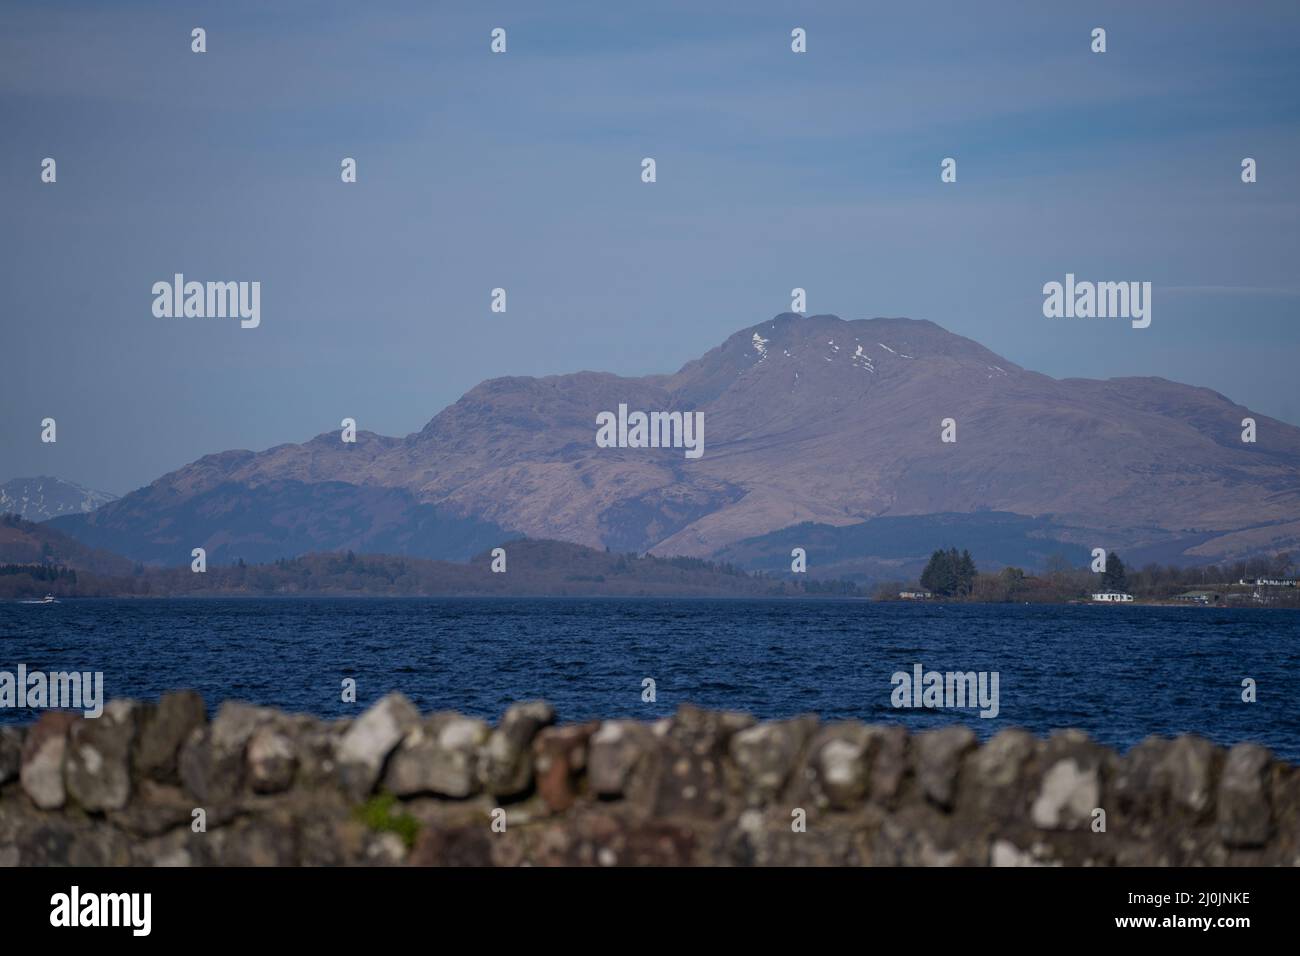 uk weather: Duck Bay, Scotland , 19th March 2020, Spring is in the air at duck bay today as people gather to enjoy the sun, have bbq's, jet ski and sun bathe Stock Photo